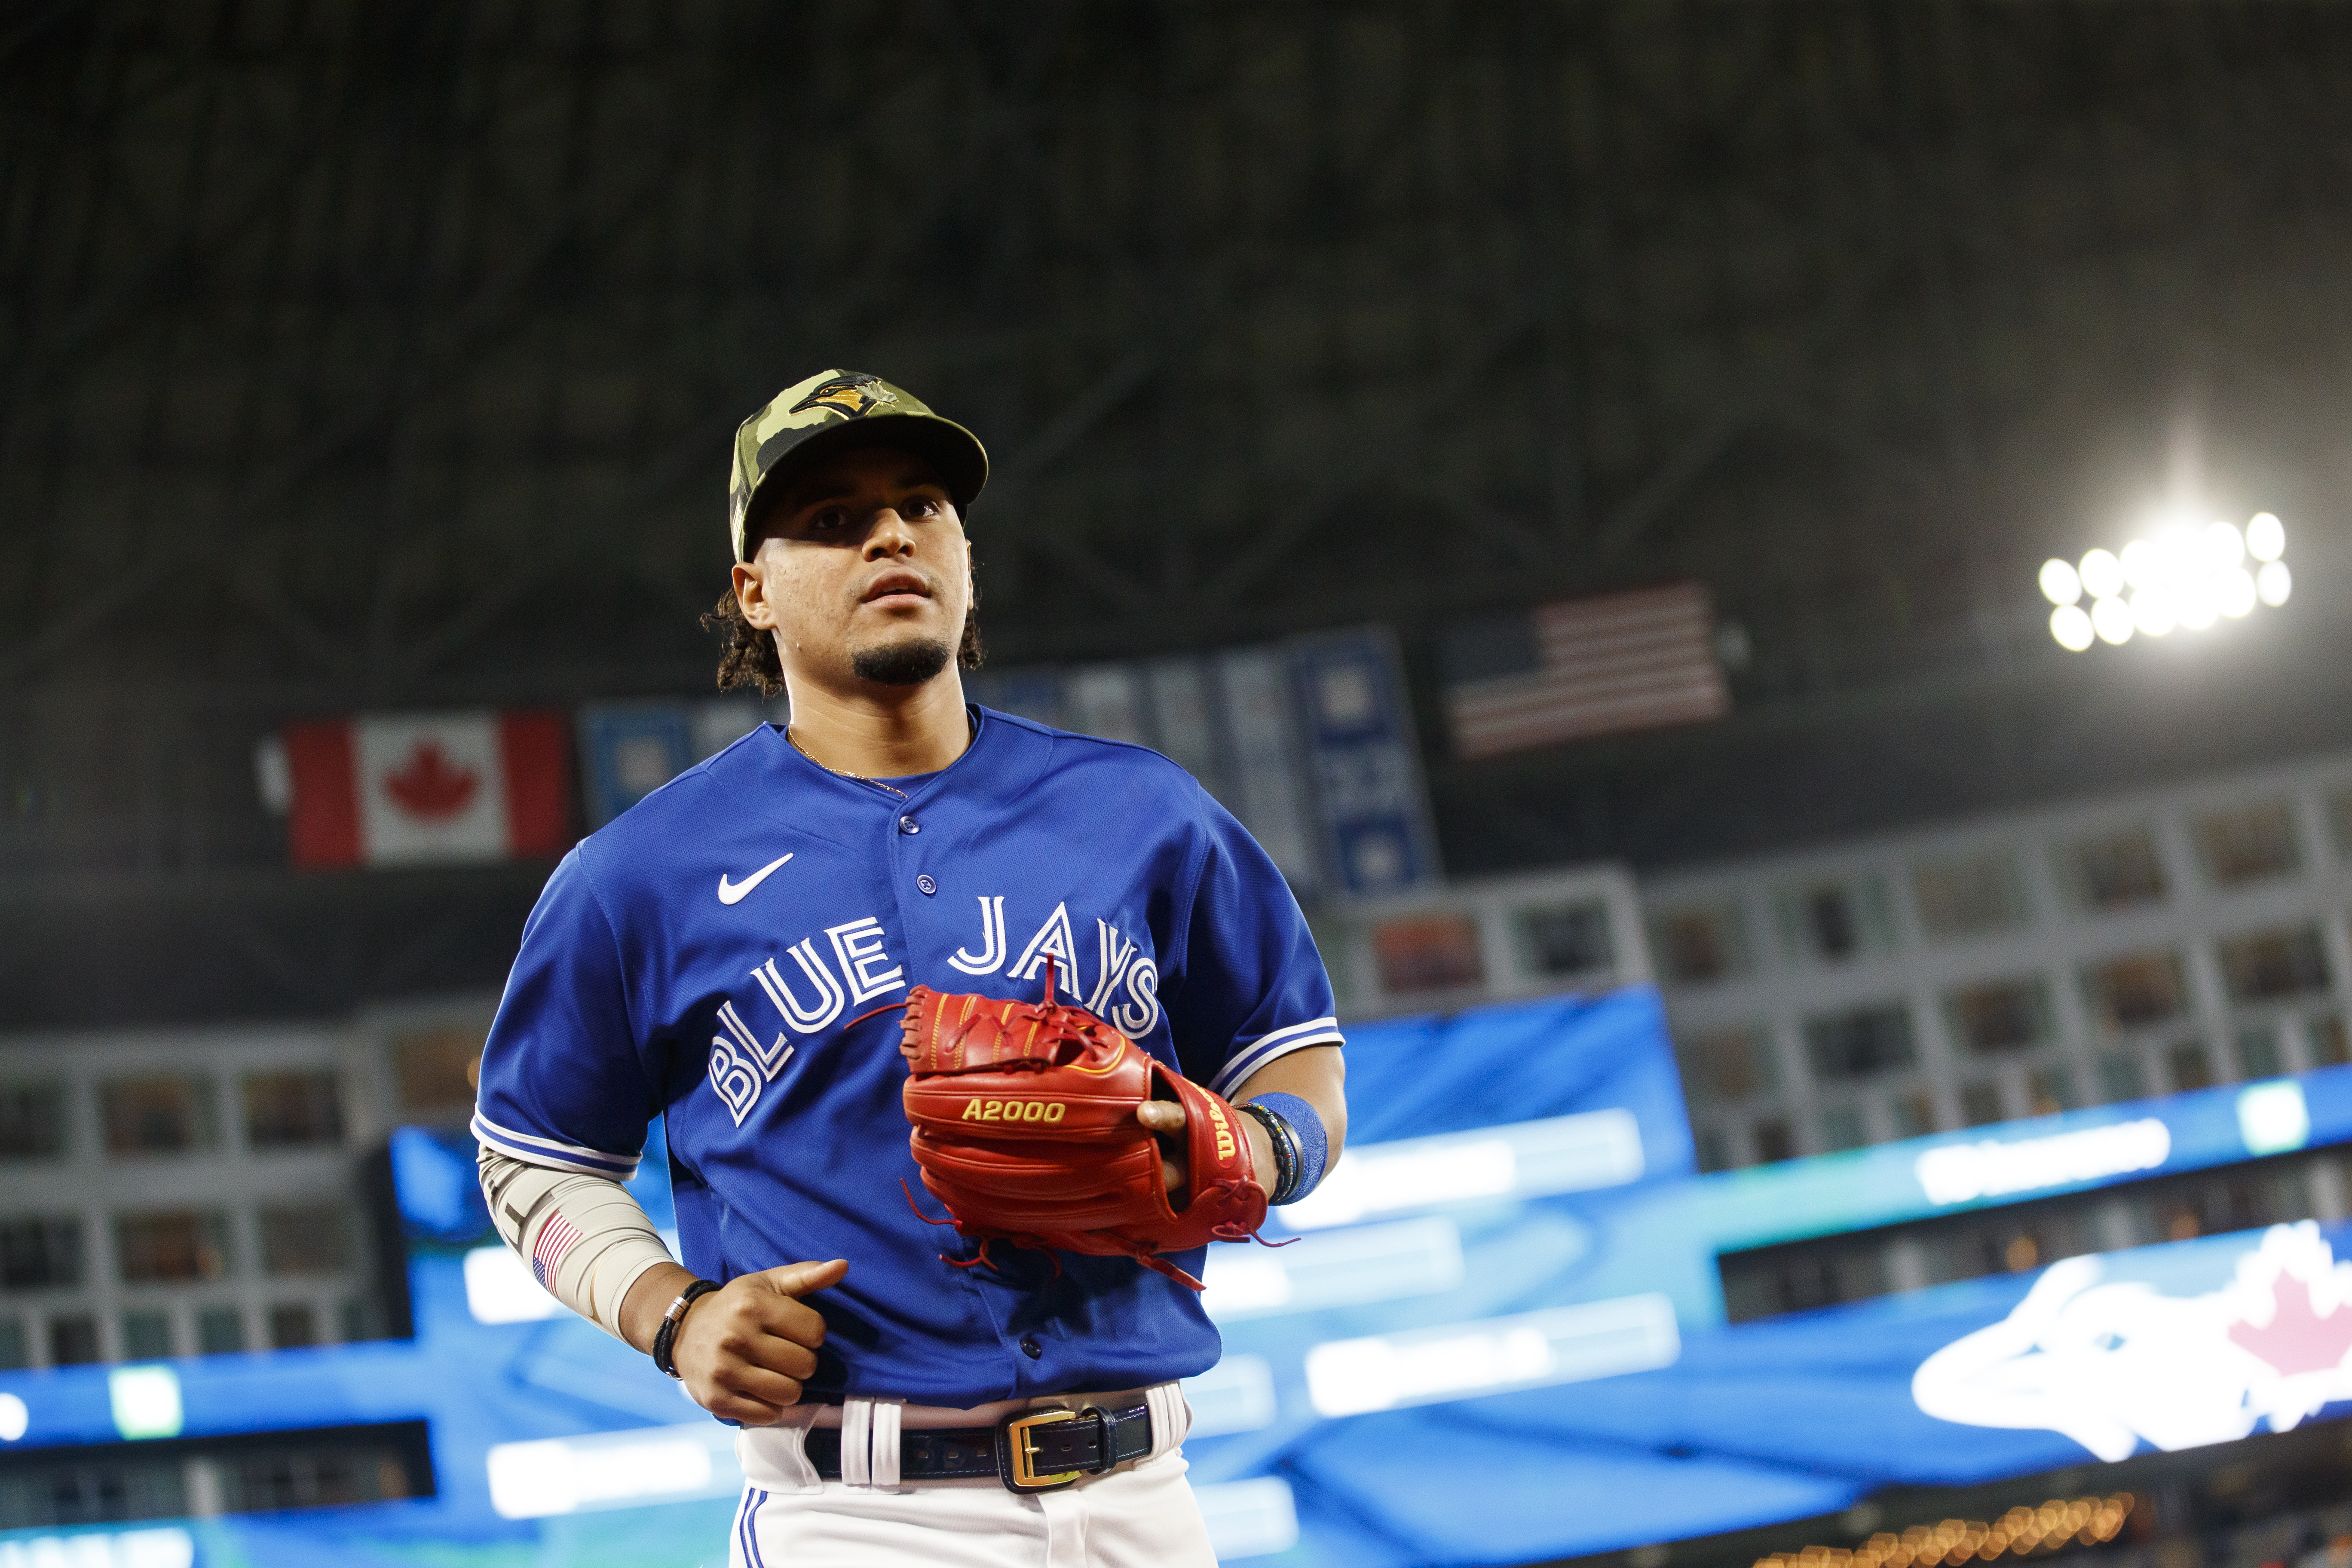 Santiago Espinal of the Toronto Blue Jays looks on during a baseball